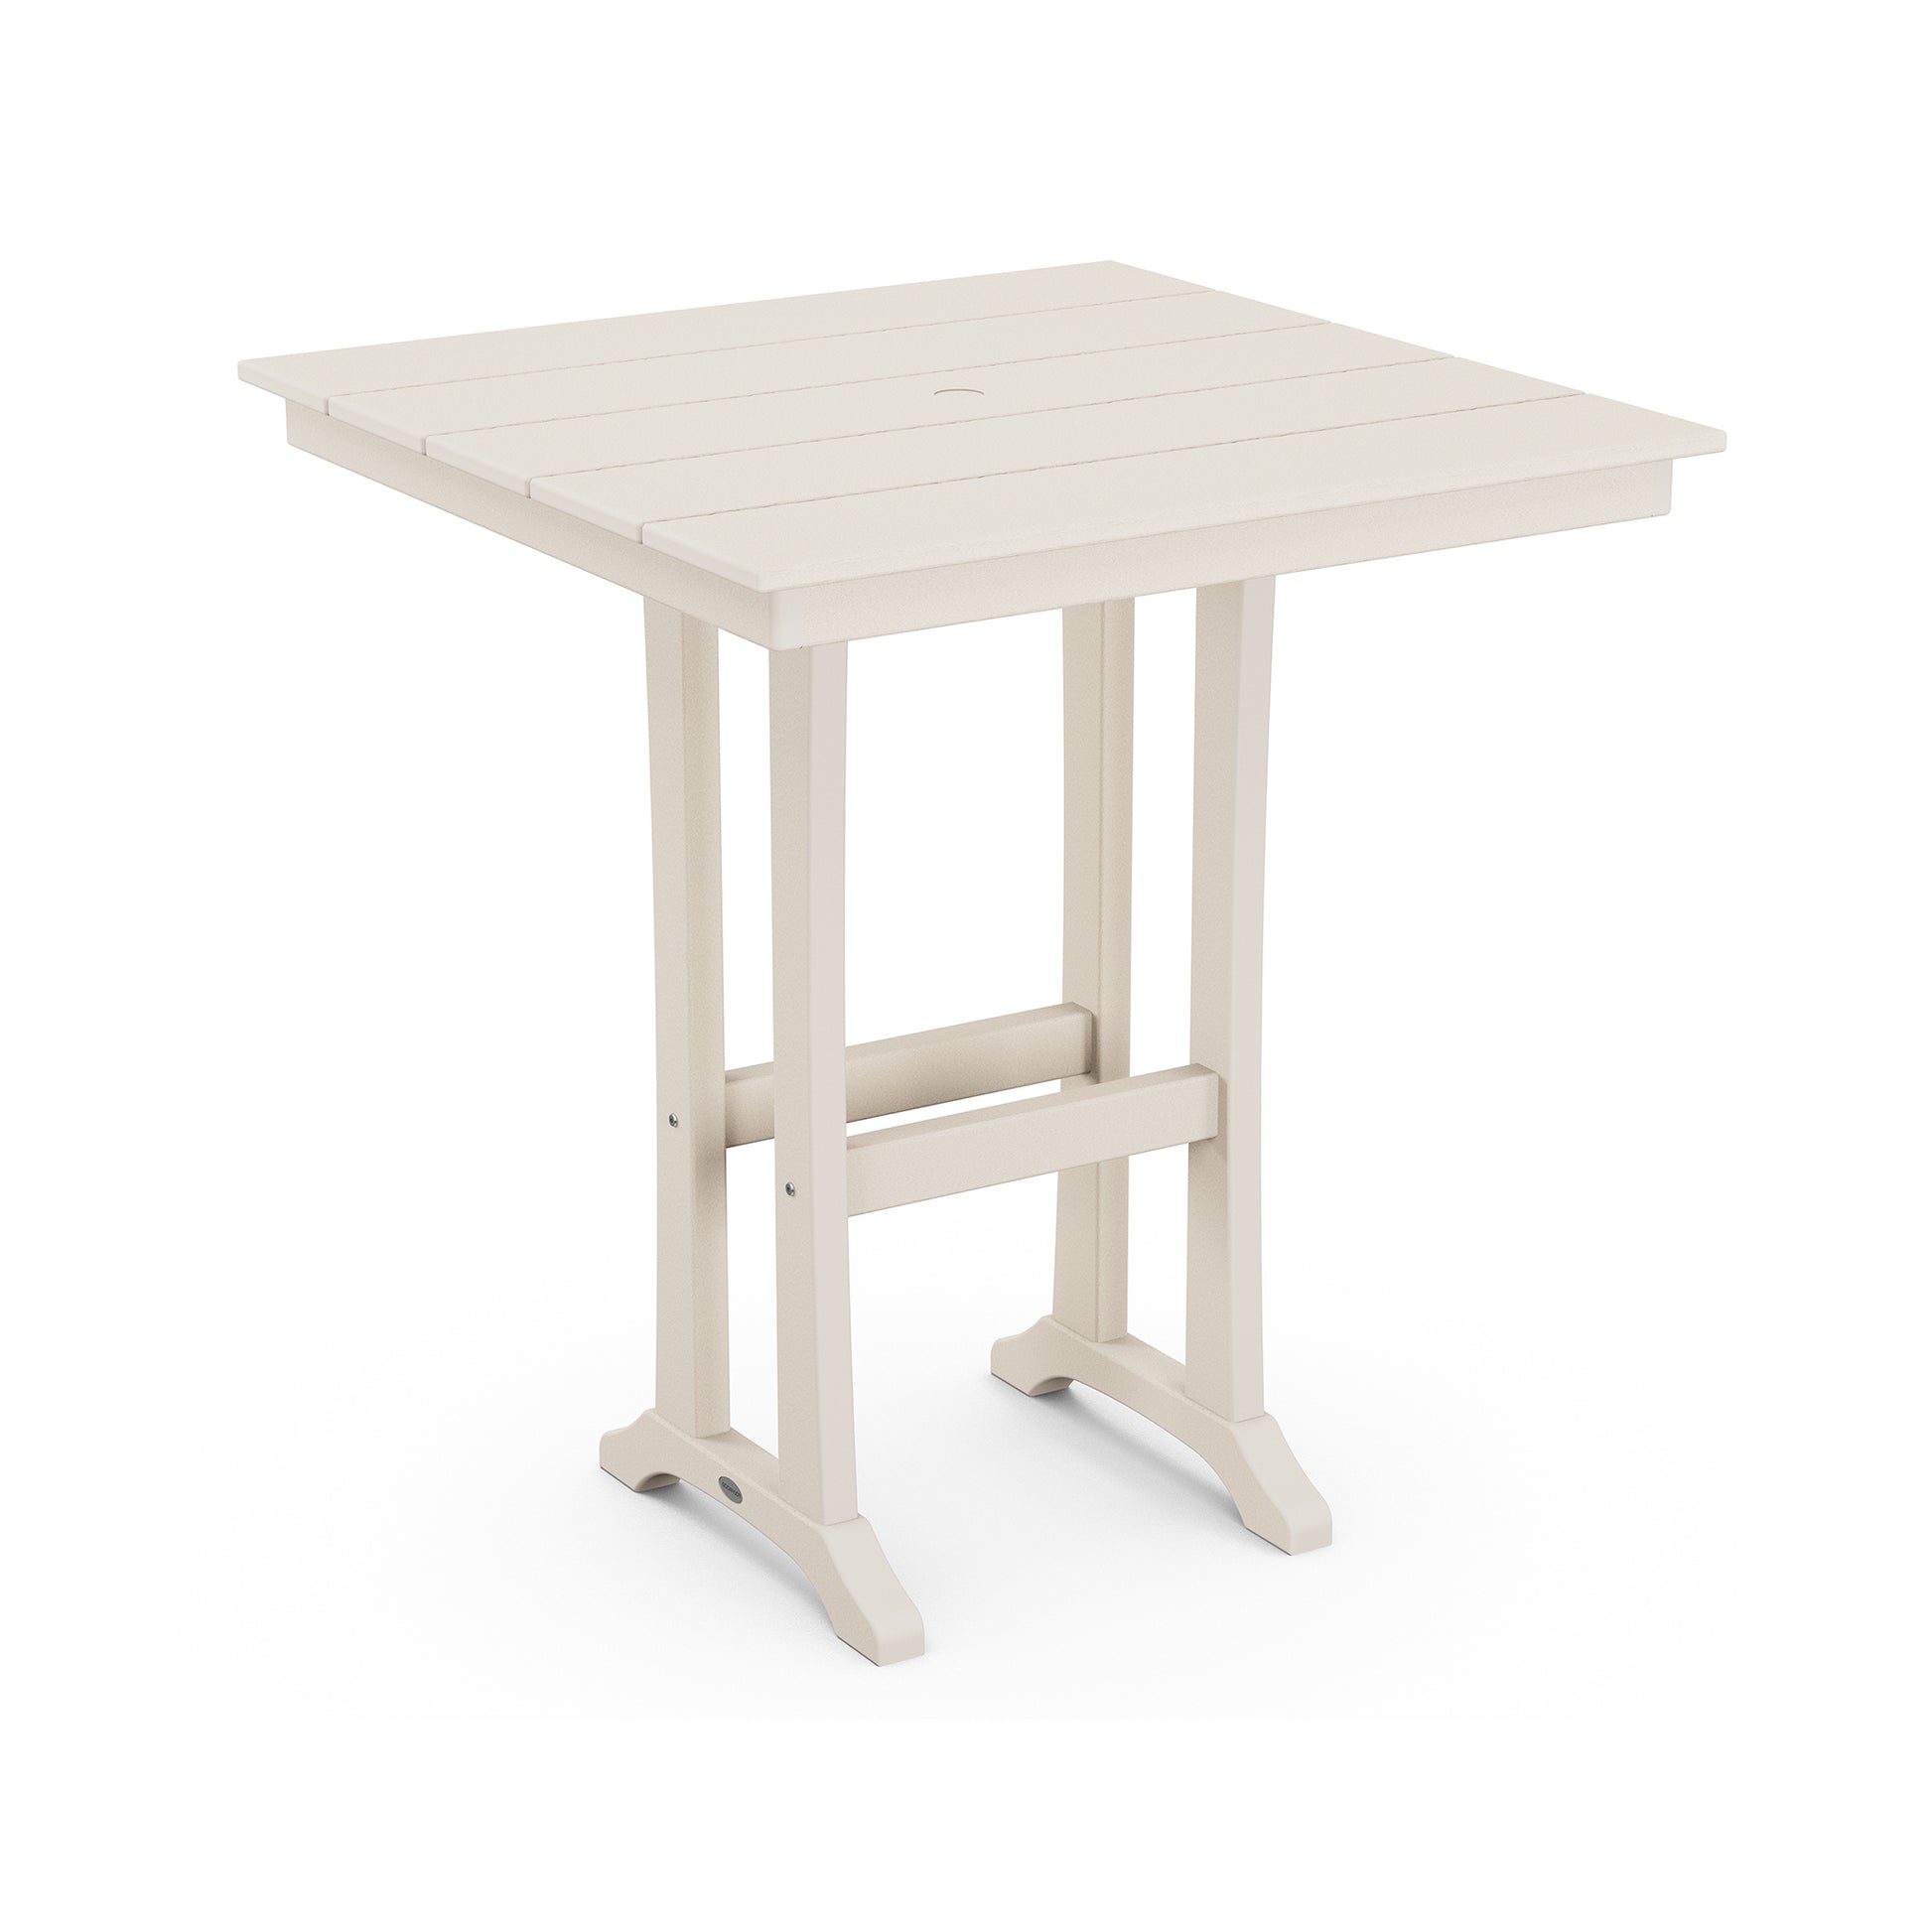 A simple square white POLYWOOD Farmhouse Trestle 37" Bar Table crafted from POLYWOOD lumber, with flat surfaces and a center hole, supported by a sturdy, two-legged frame connected by cross bars. The floor remains visible, suggesting a.